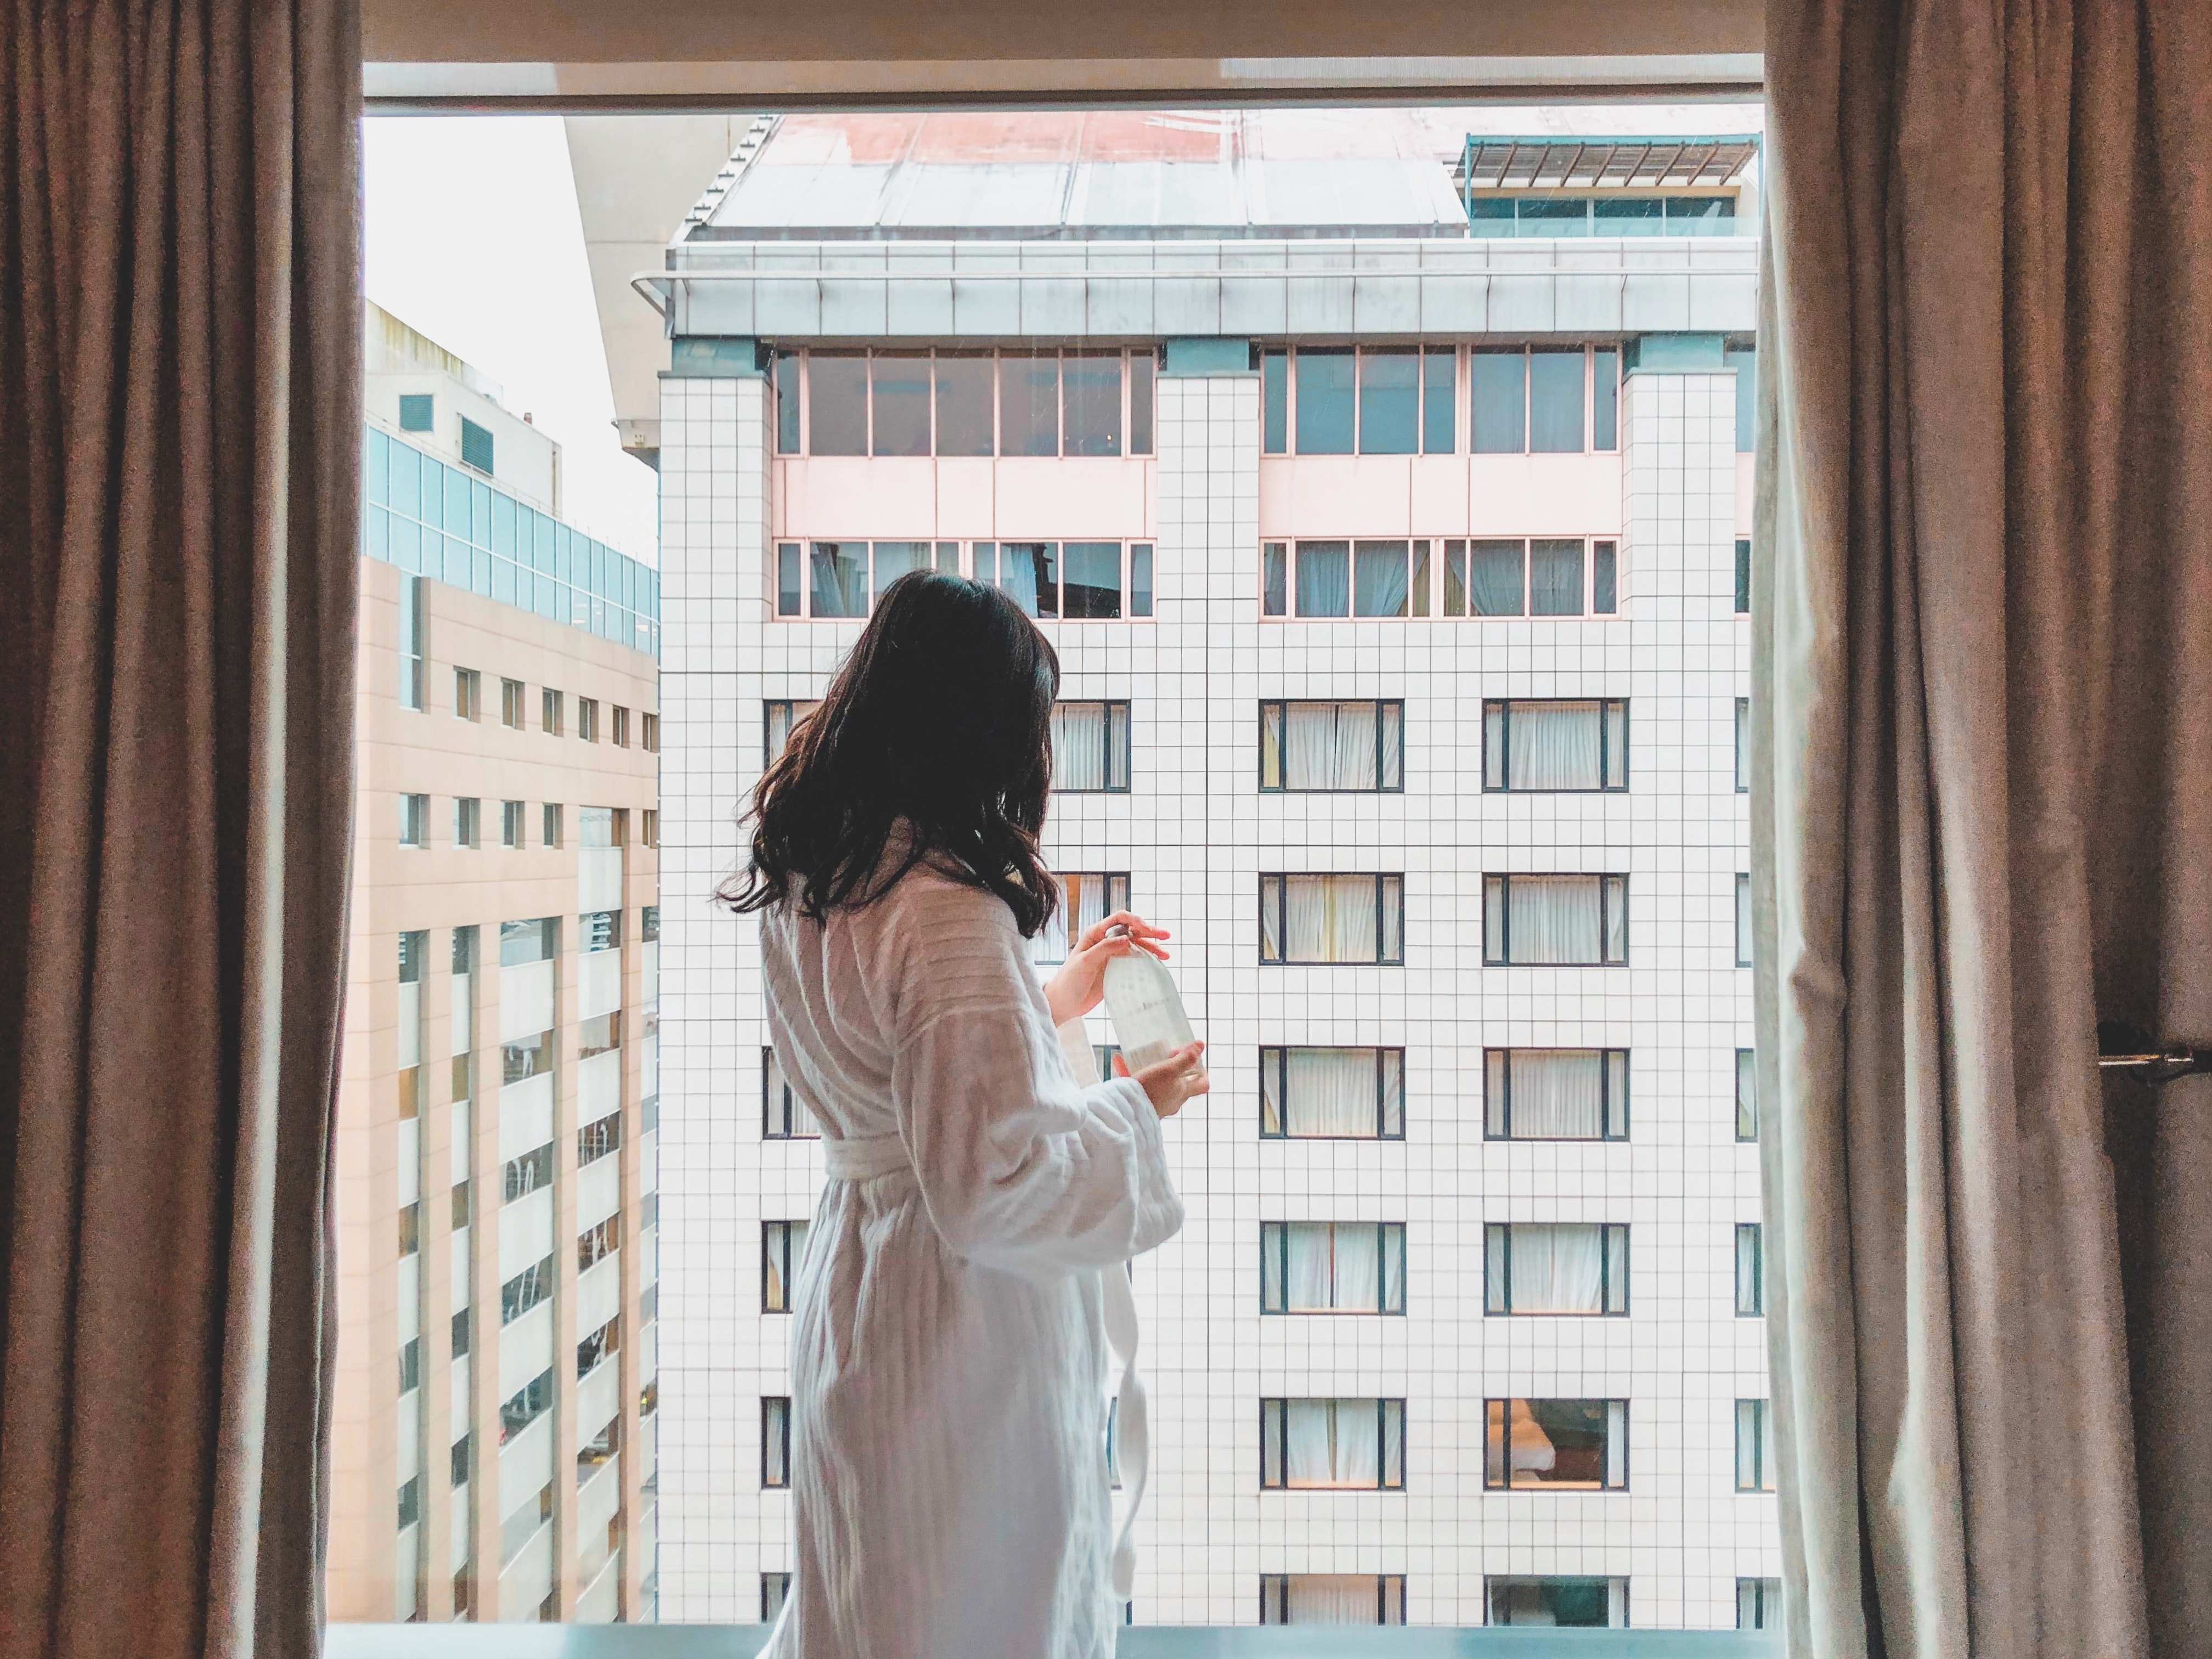 A woman stands in front of a window wearing a white bathrobe.